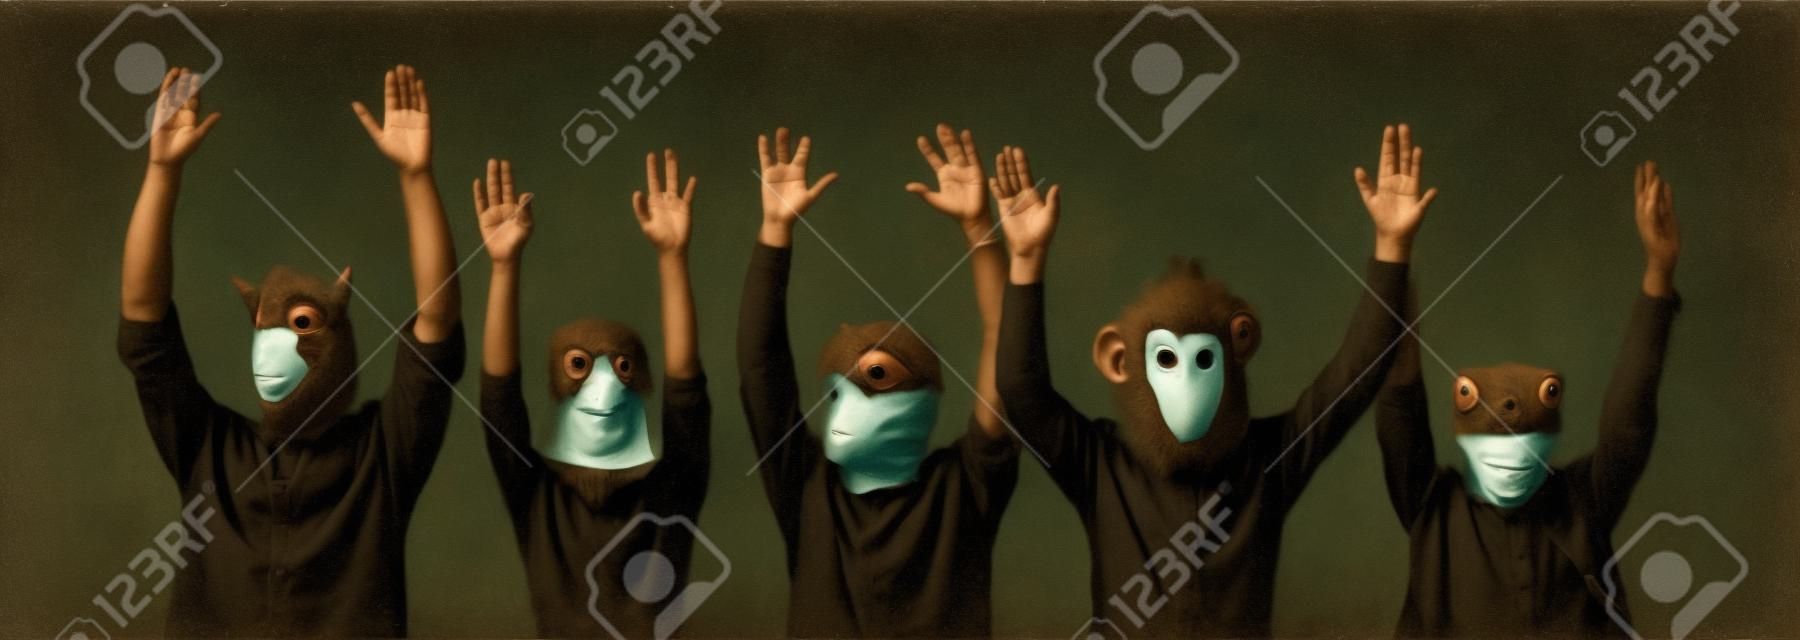 Portrait of unidentified young people in various rubber masks in form of animal heads. Young men and women in masks of horse, pigeon, dinosaur, monkey and frog stand in row with arms raised. Banner.